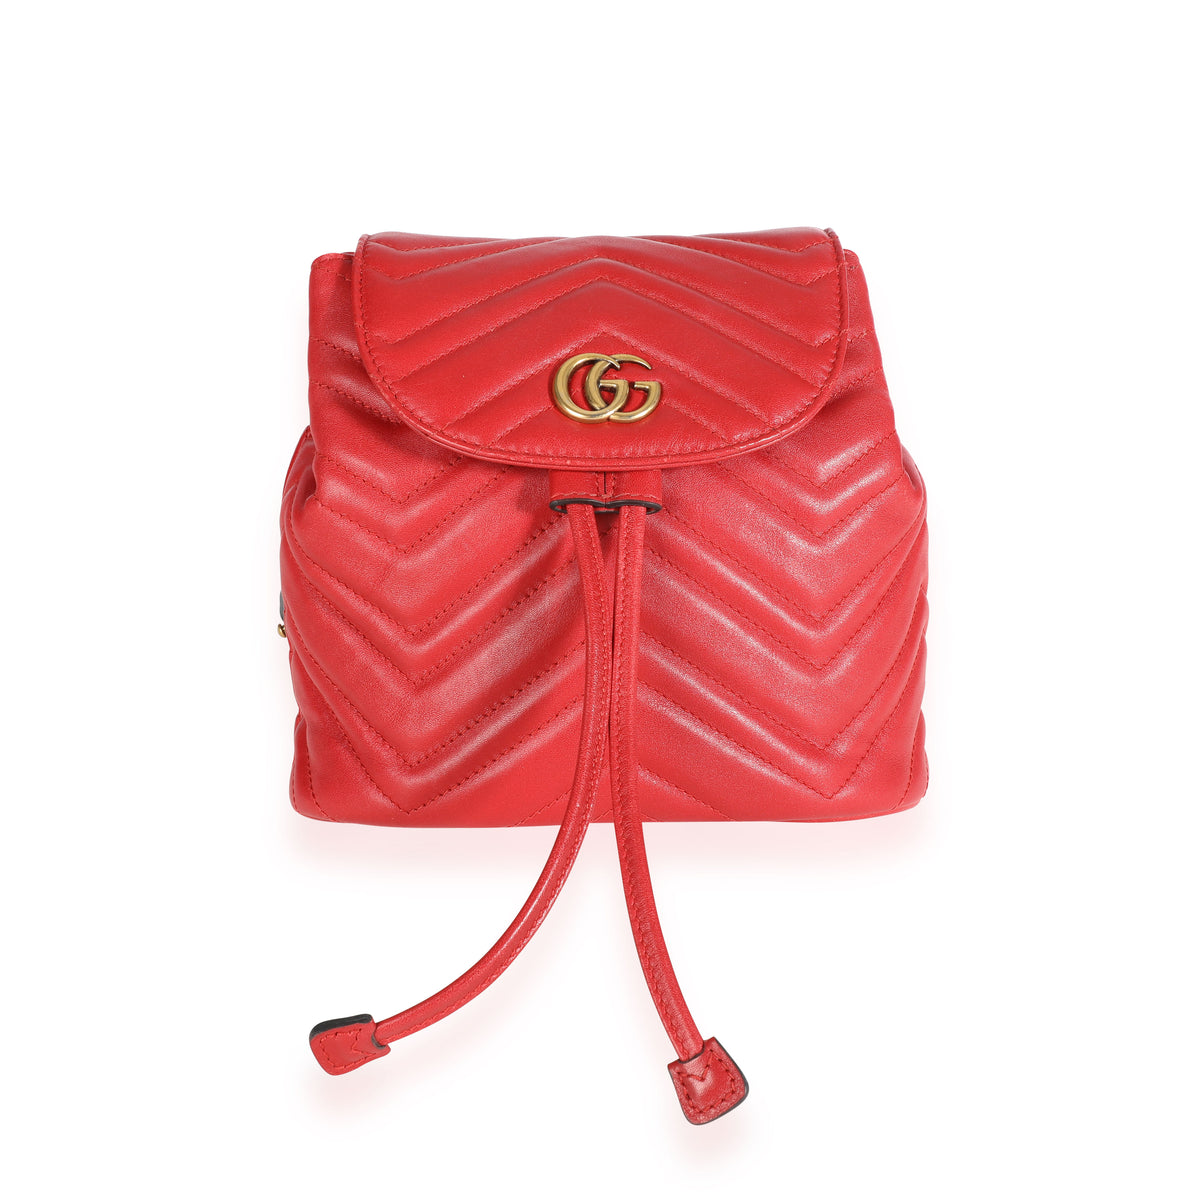 Gucci Red Matelassé Leather GG Marmont Mini Backpack